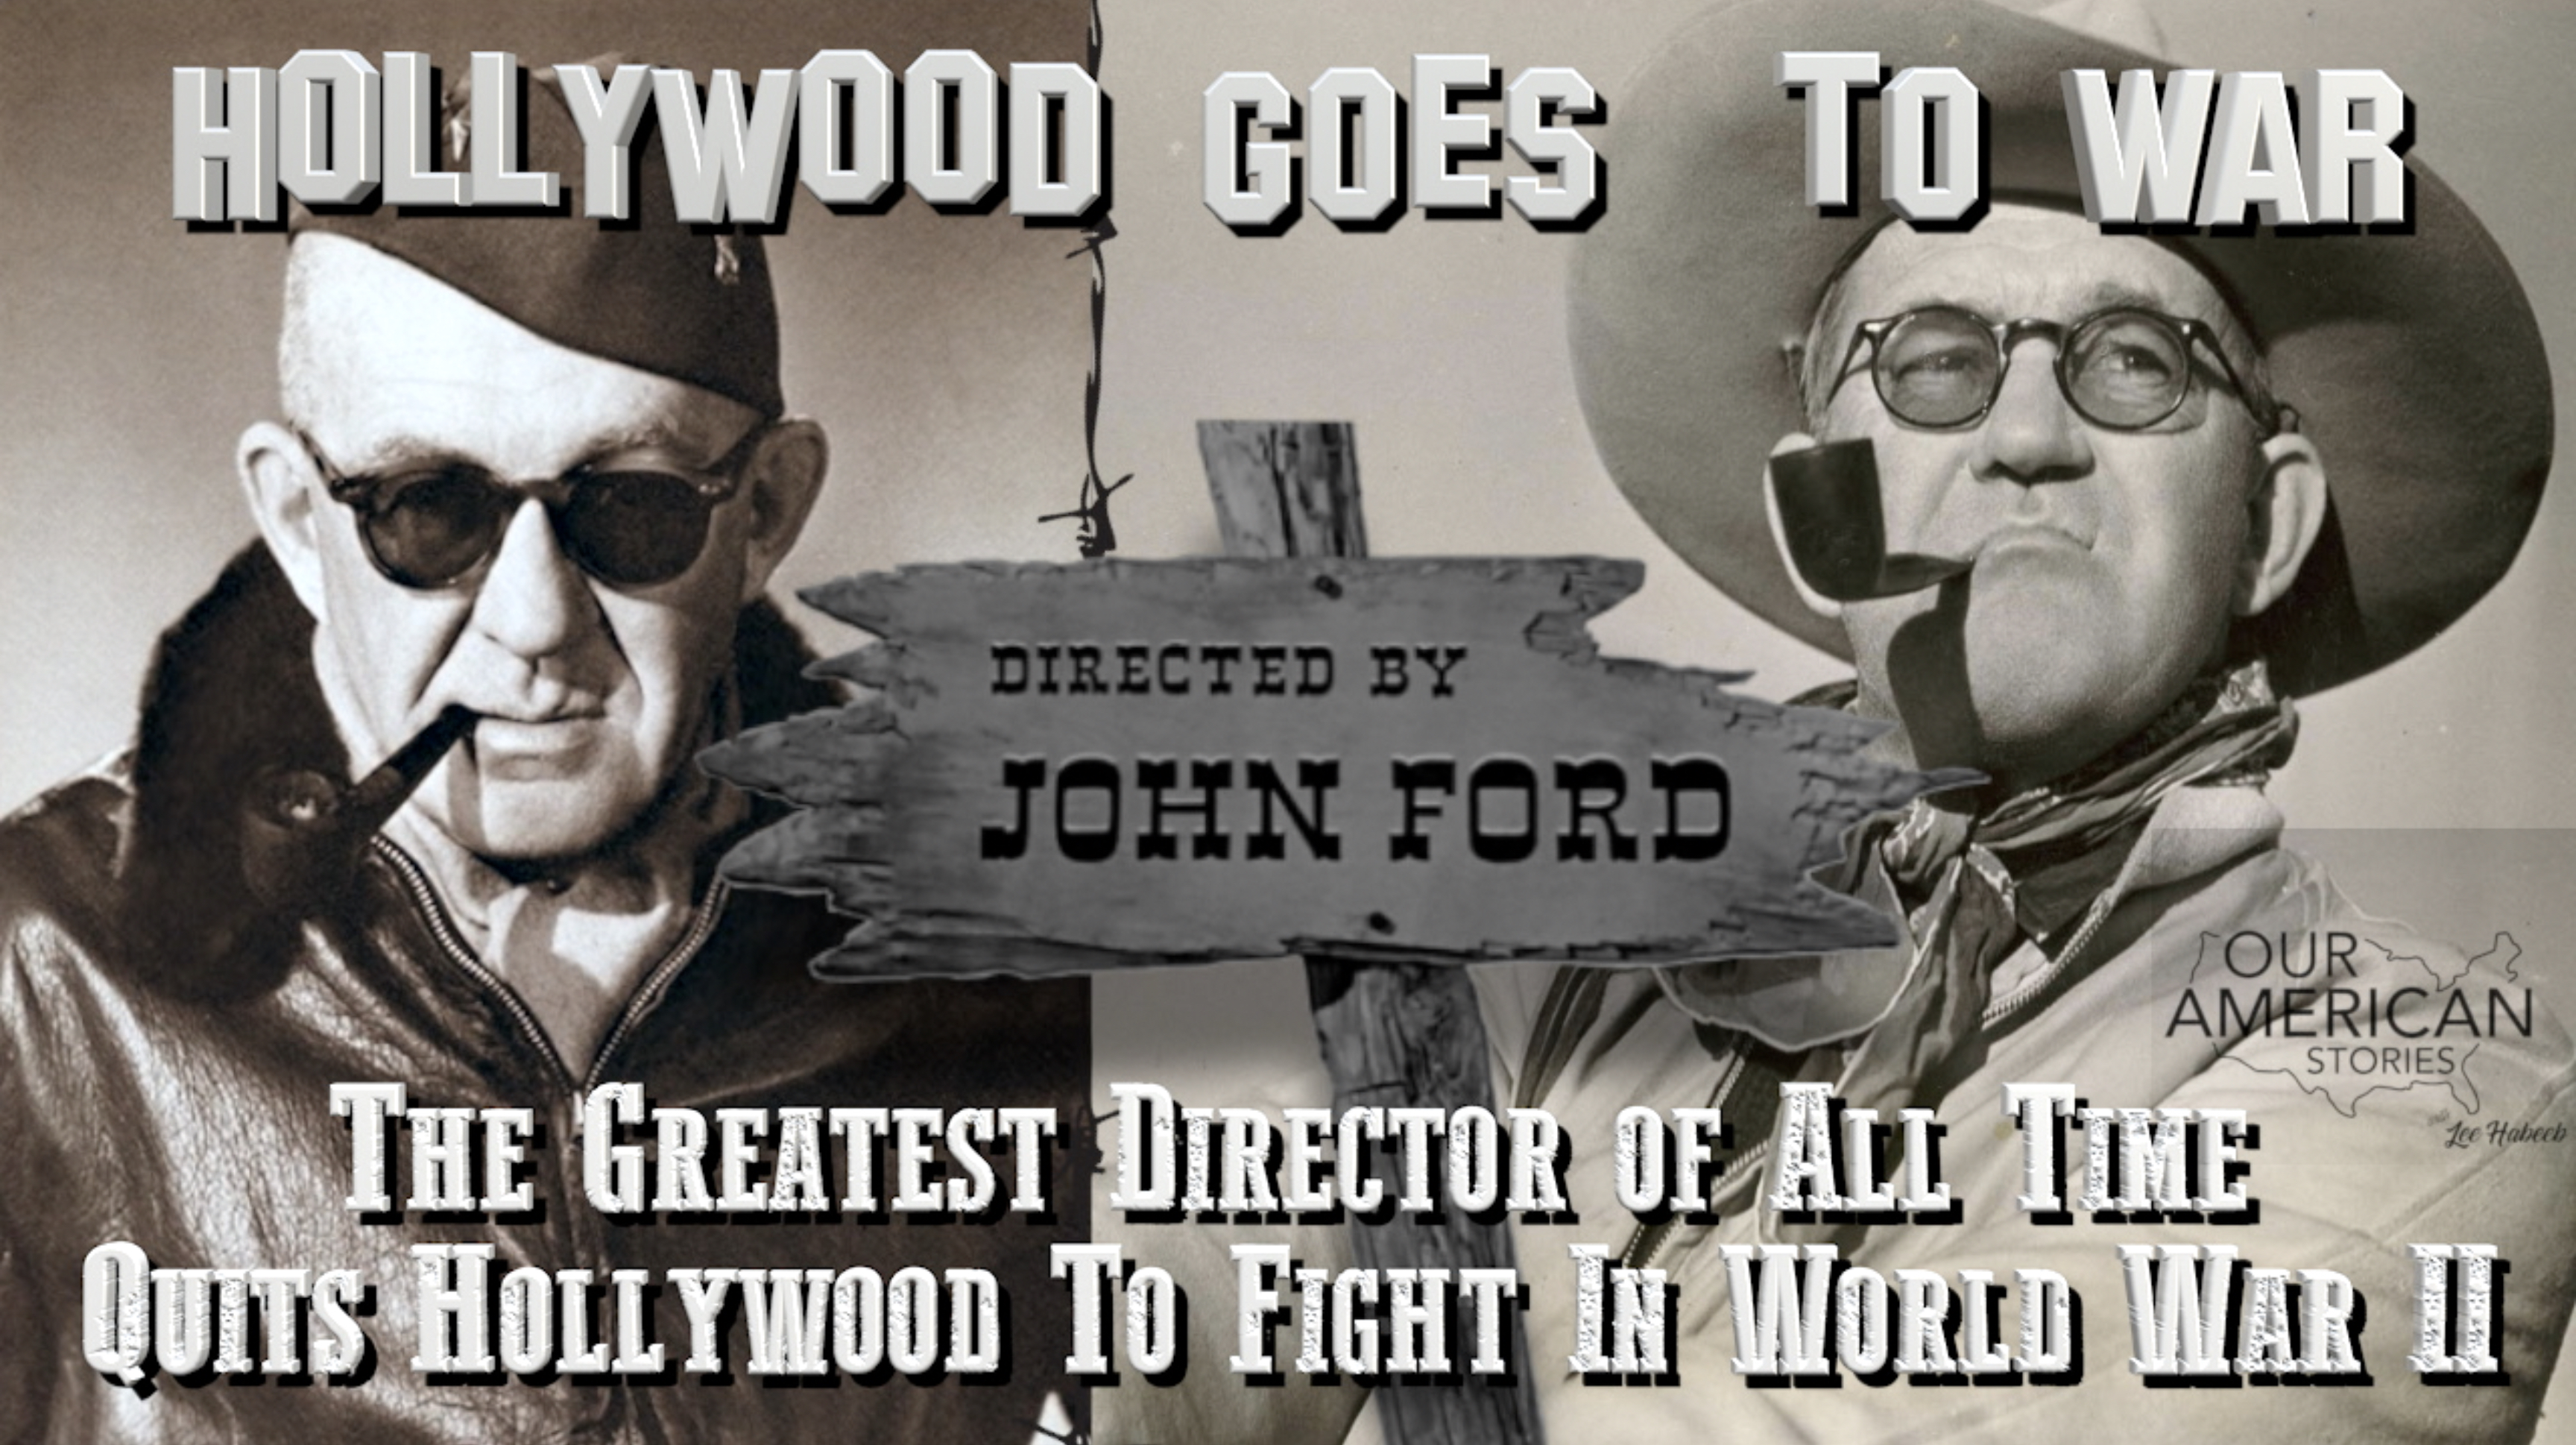 John Ford: The Greatest Director of All Time Quits Hollywood To Fight In World War II